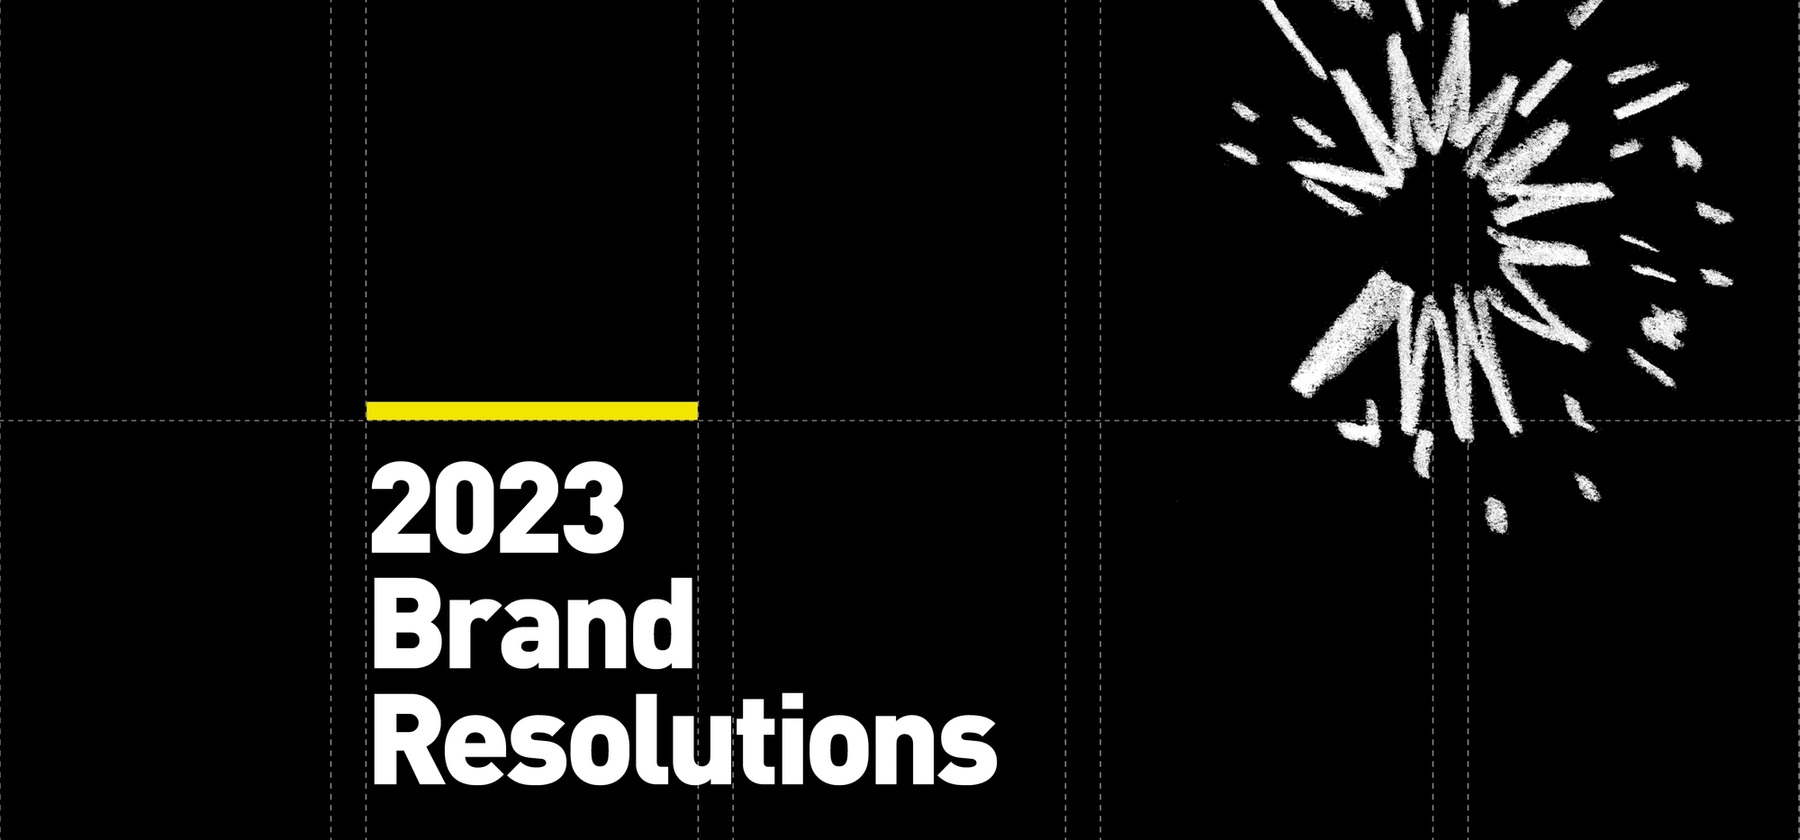 psLondon | Your brand’s new year’s 2023 resolutions for marketing and advertising